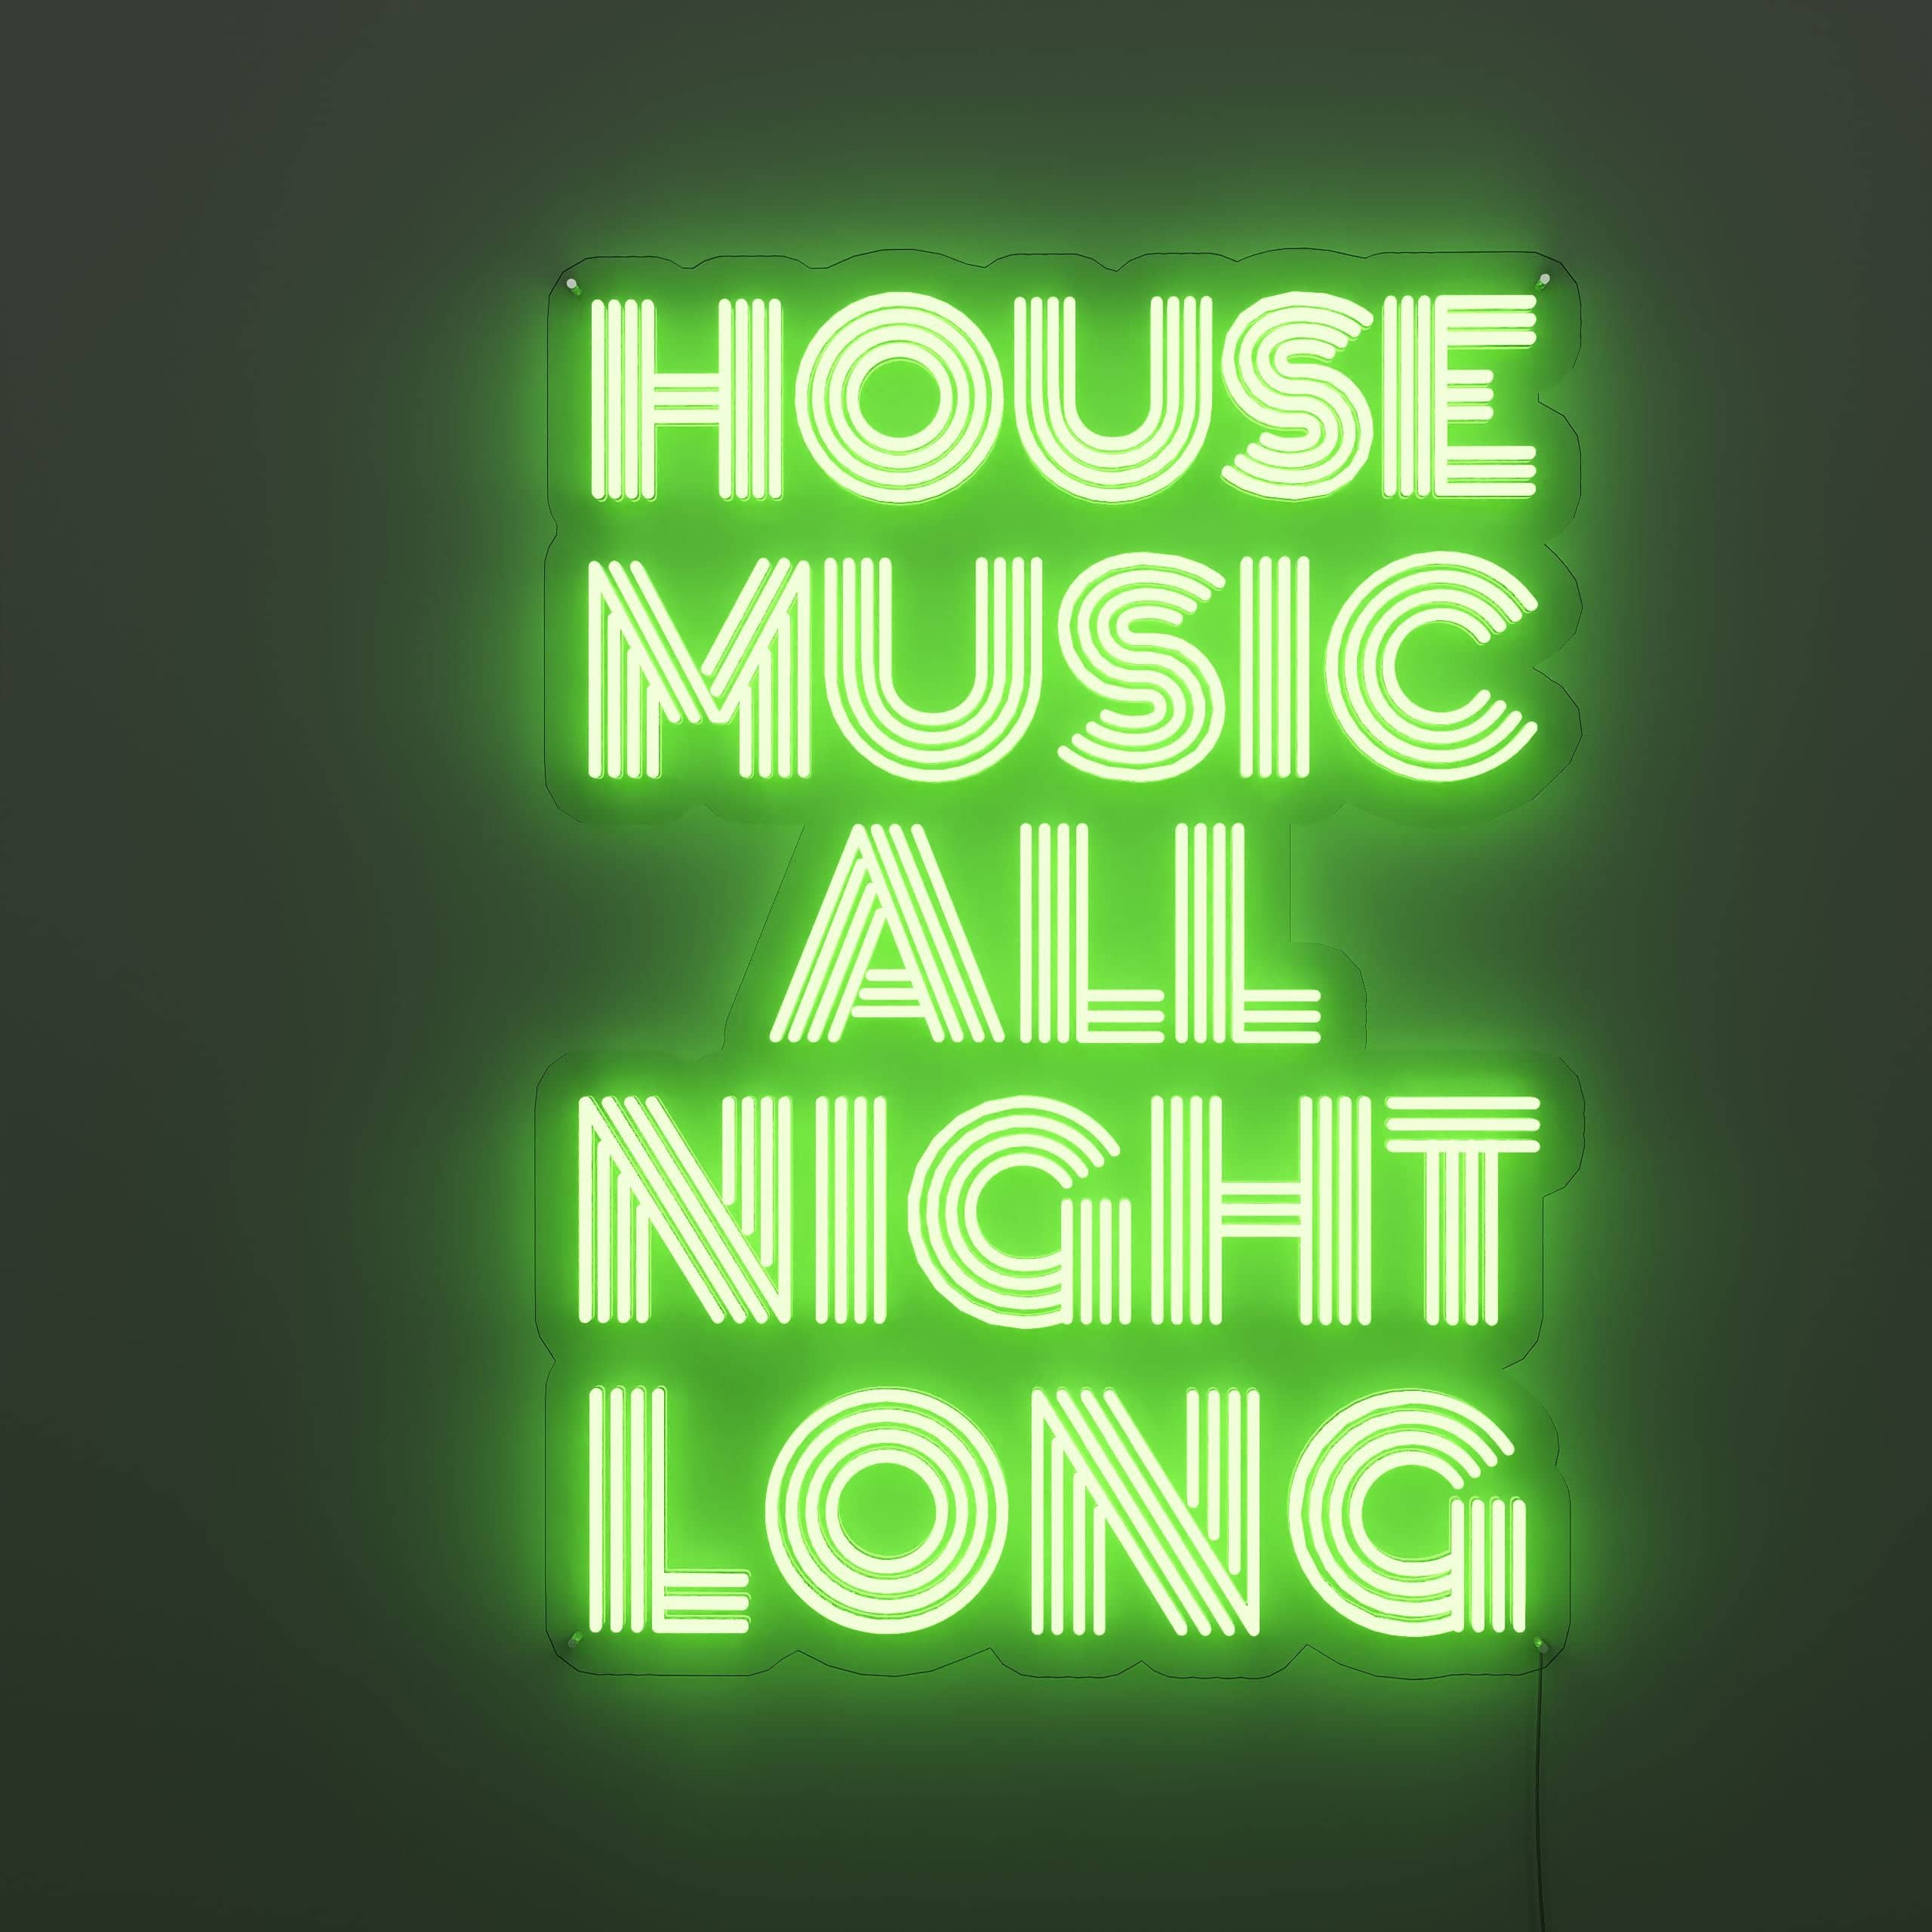 night-of-house-grooves-neon-sign-lite